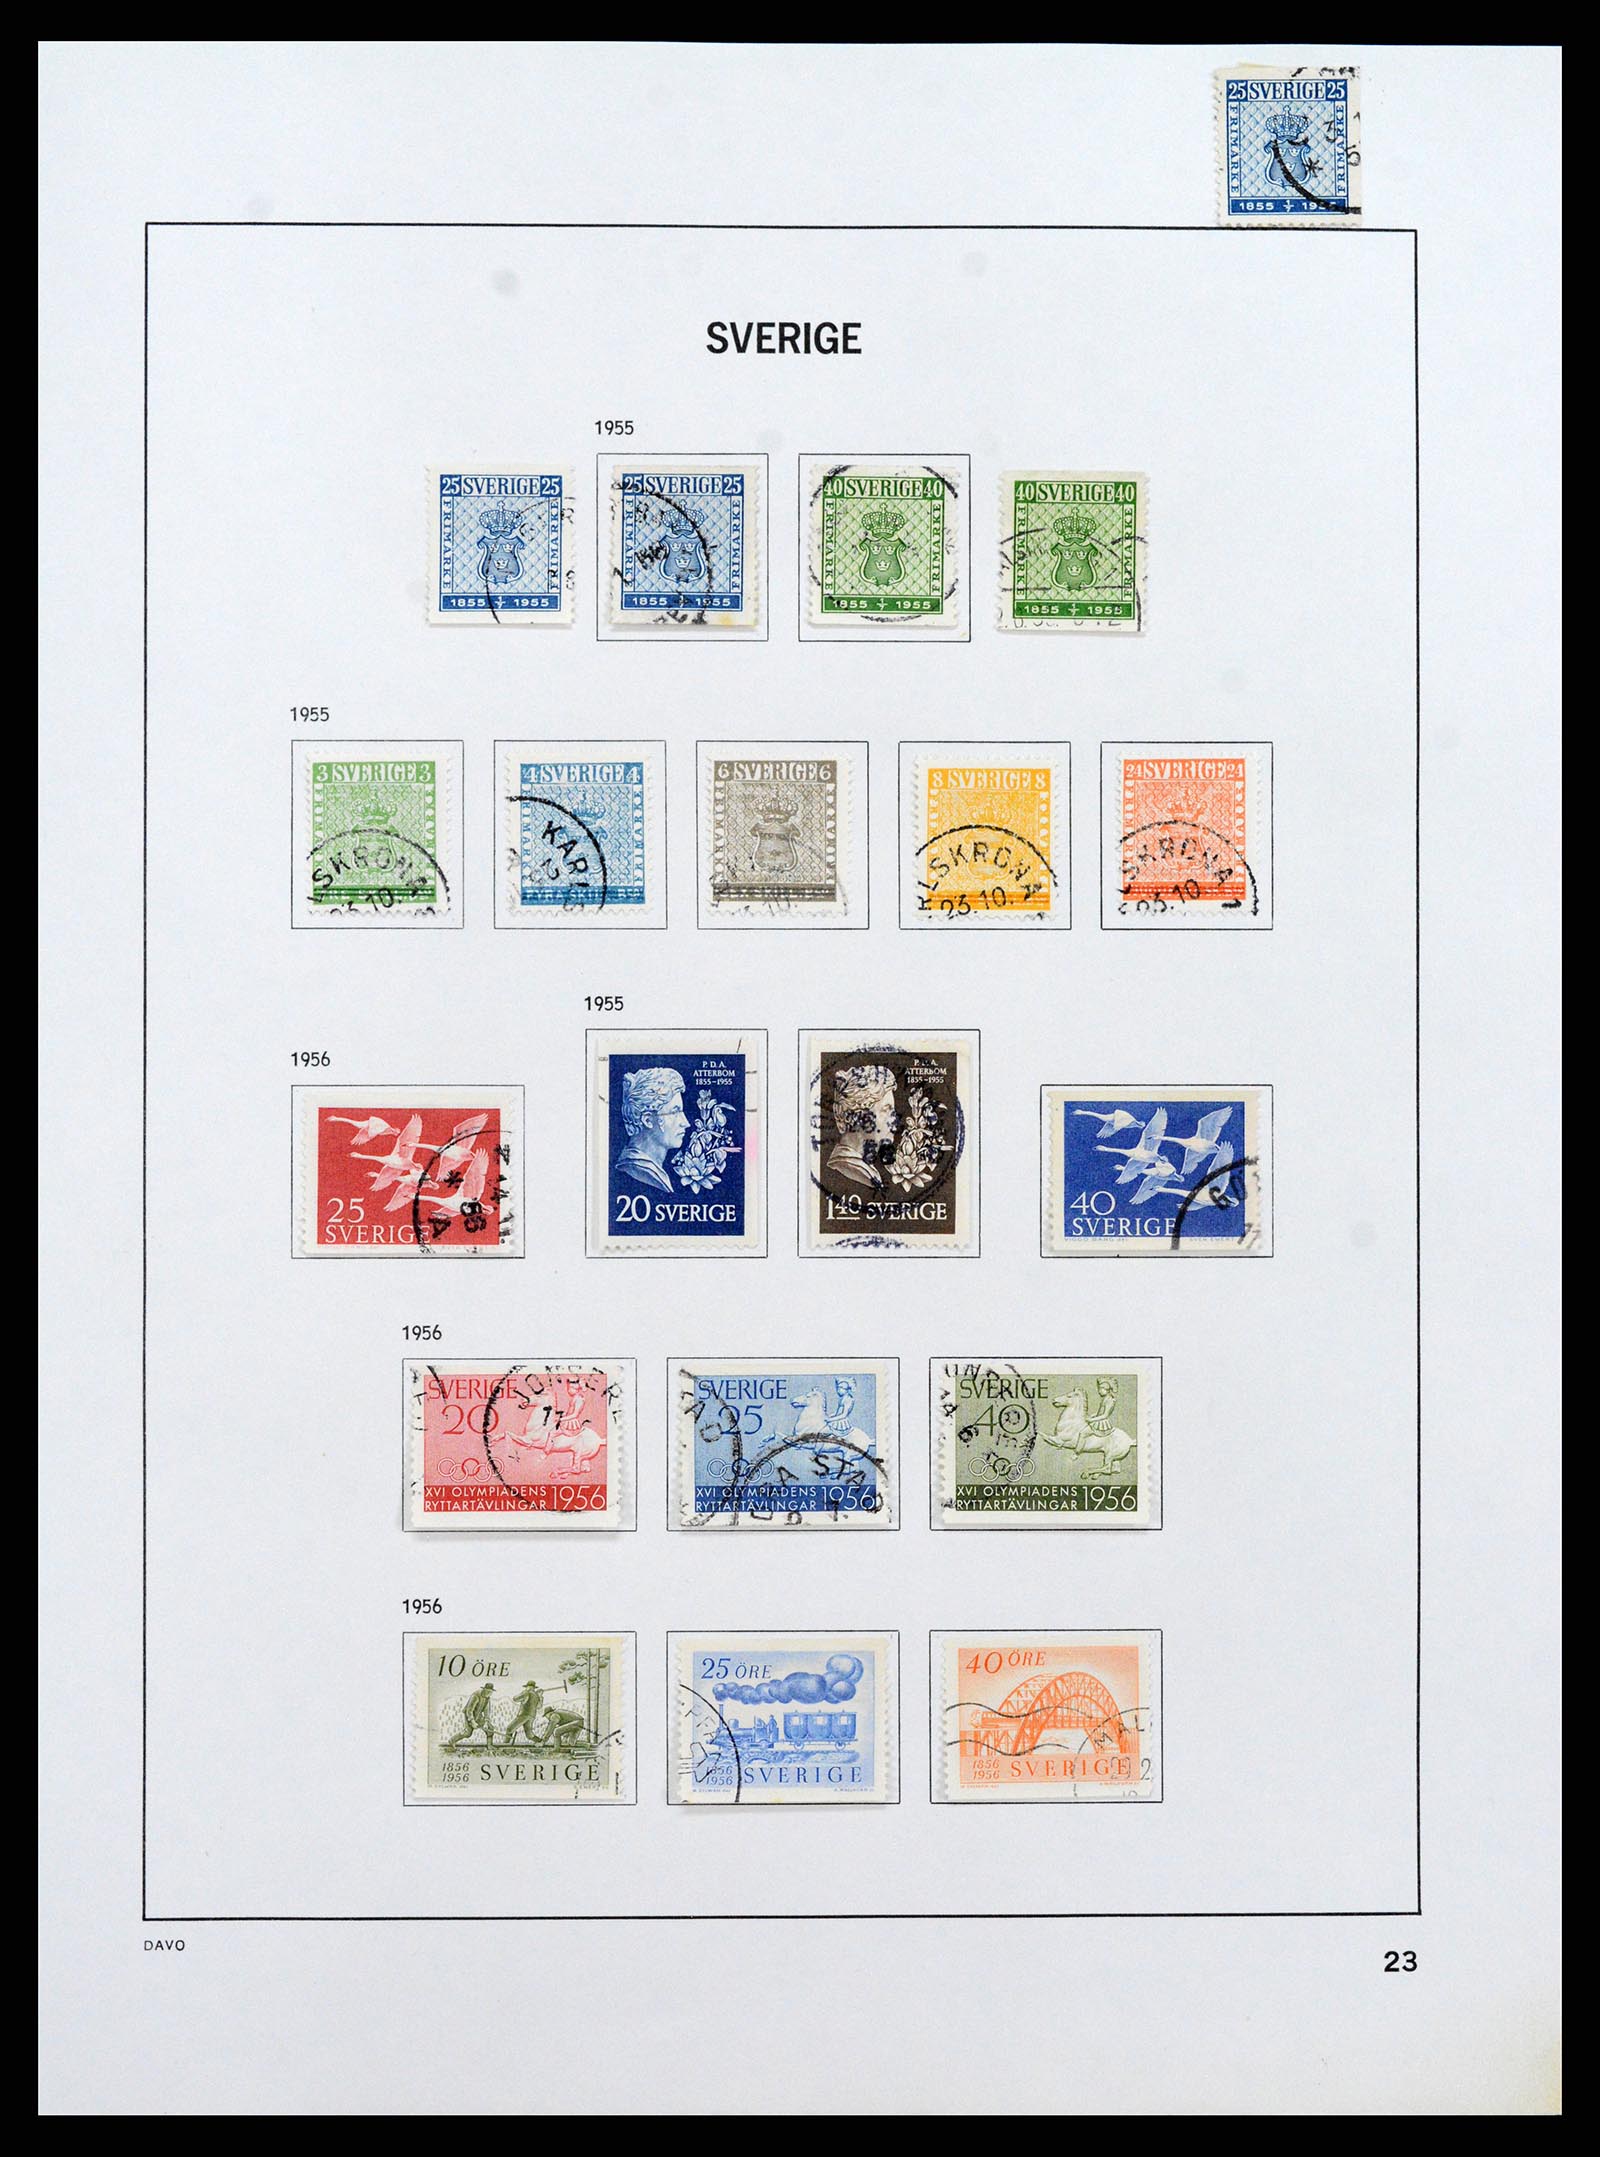 37414 032 - Stamp collection 37414 Sweden 1855-1997.